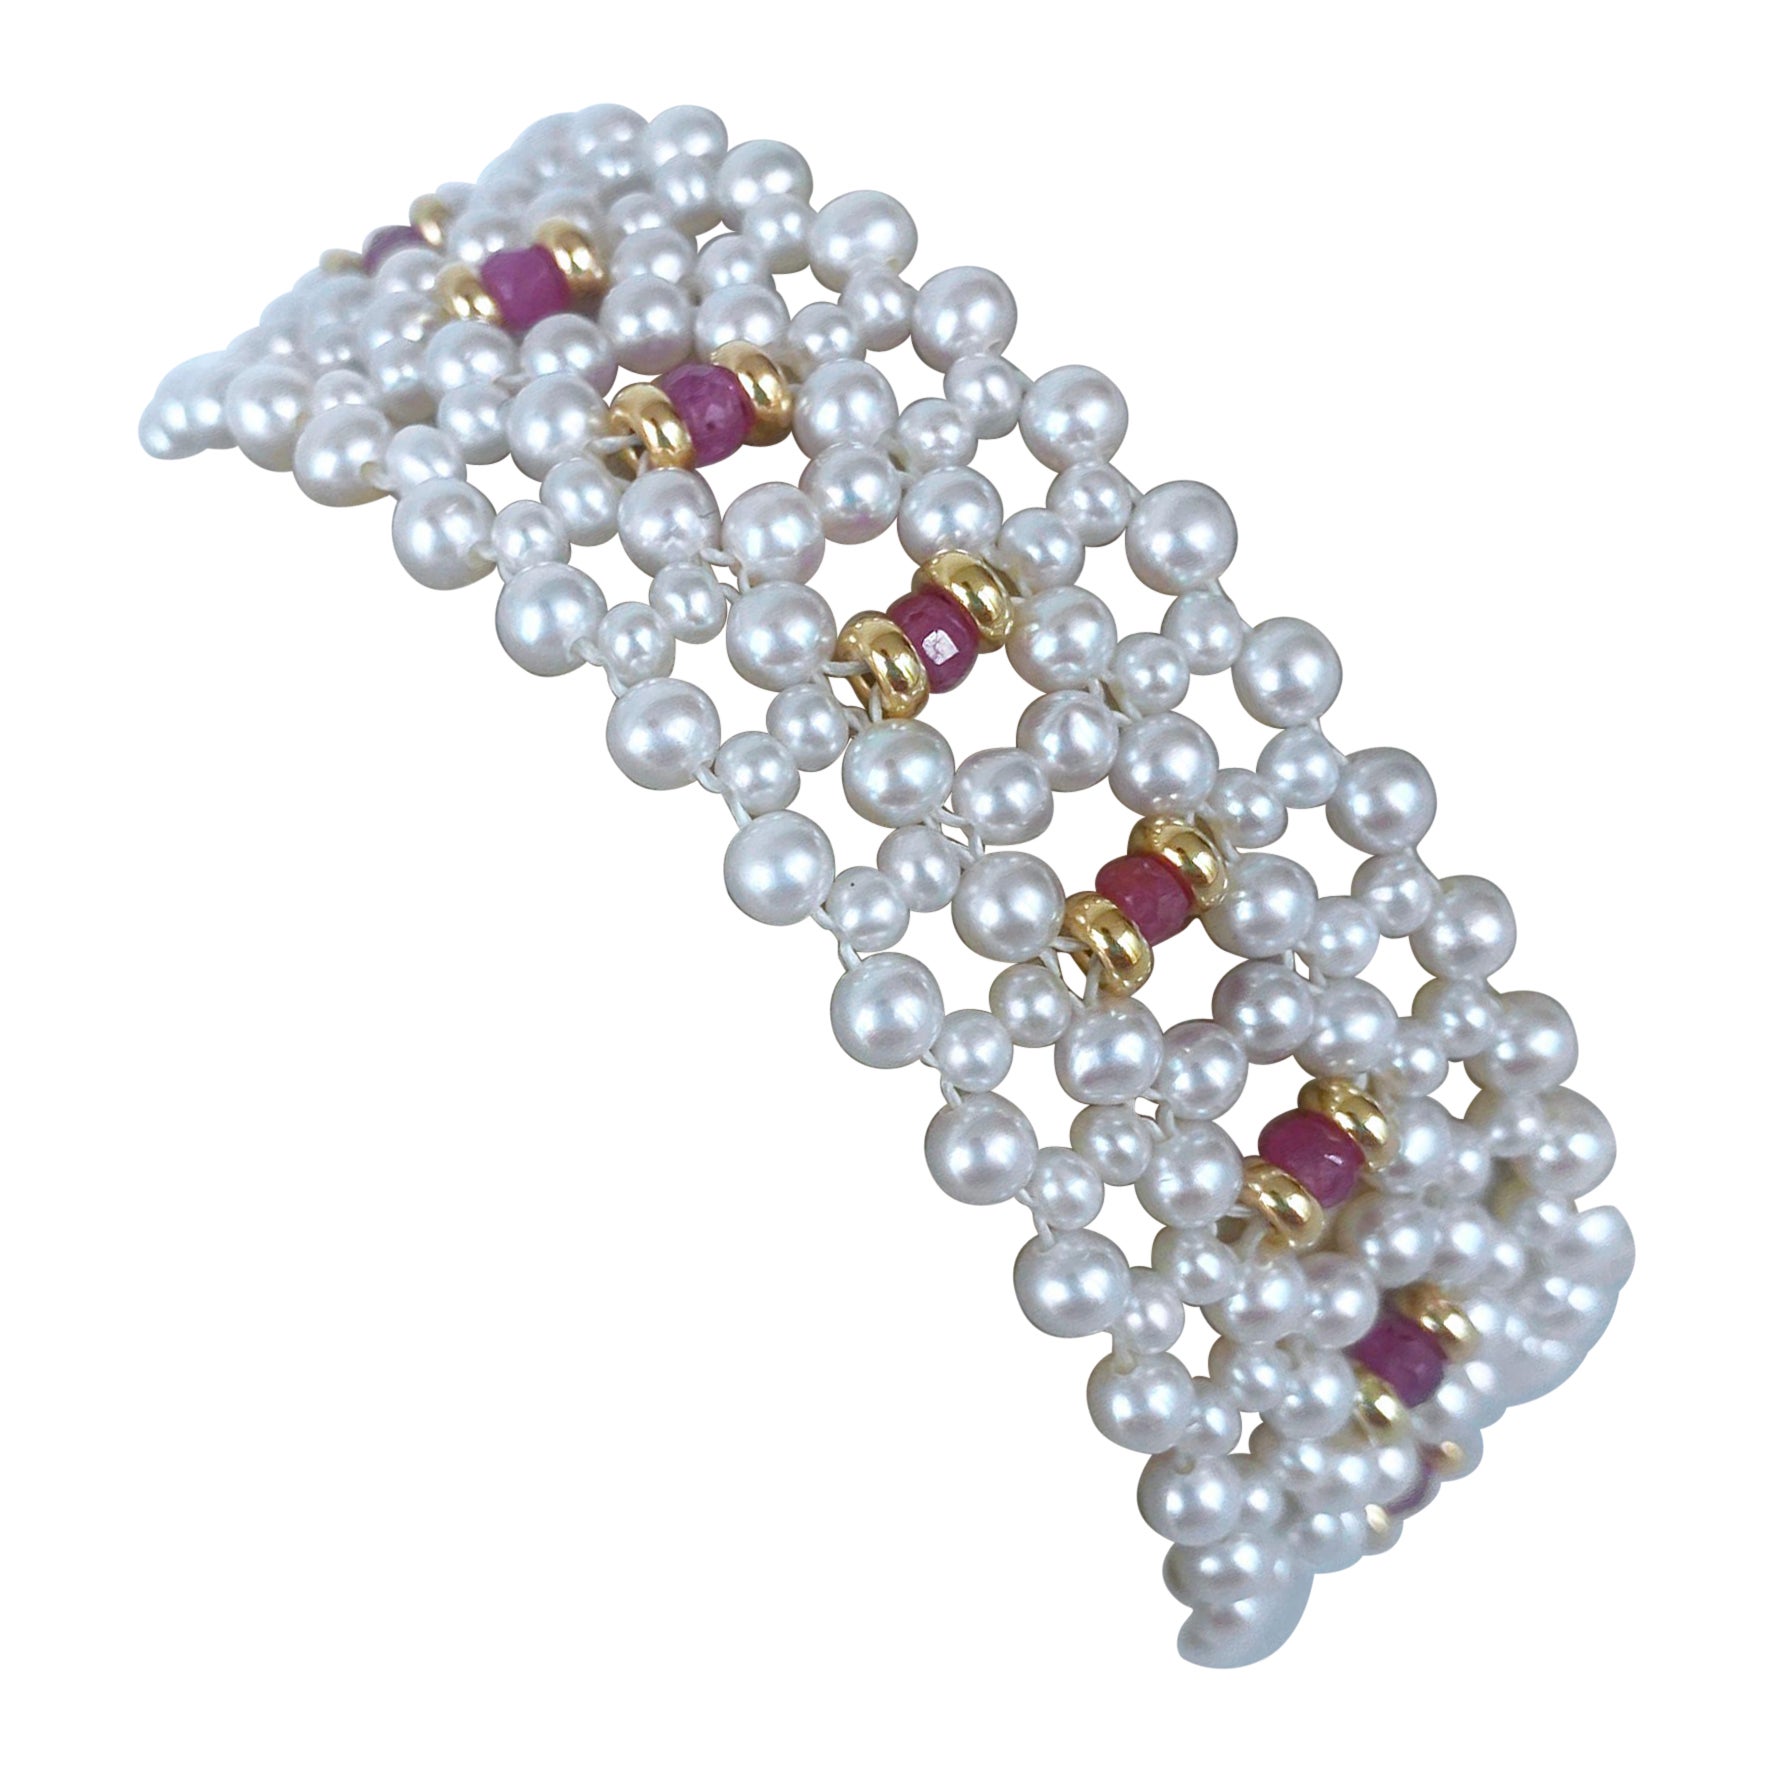 Beautiful Bracelet by Marina J. This piece is made using small cultured Pearls, Faceted Sapphires and Solid 14k Yellow Gold findings all intricately woven together into a Fine Lace like design. The Pearls display a beautiful and soft luster that